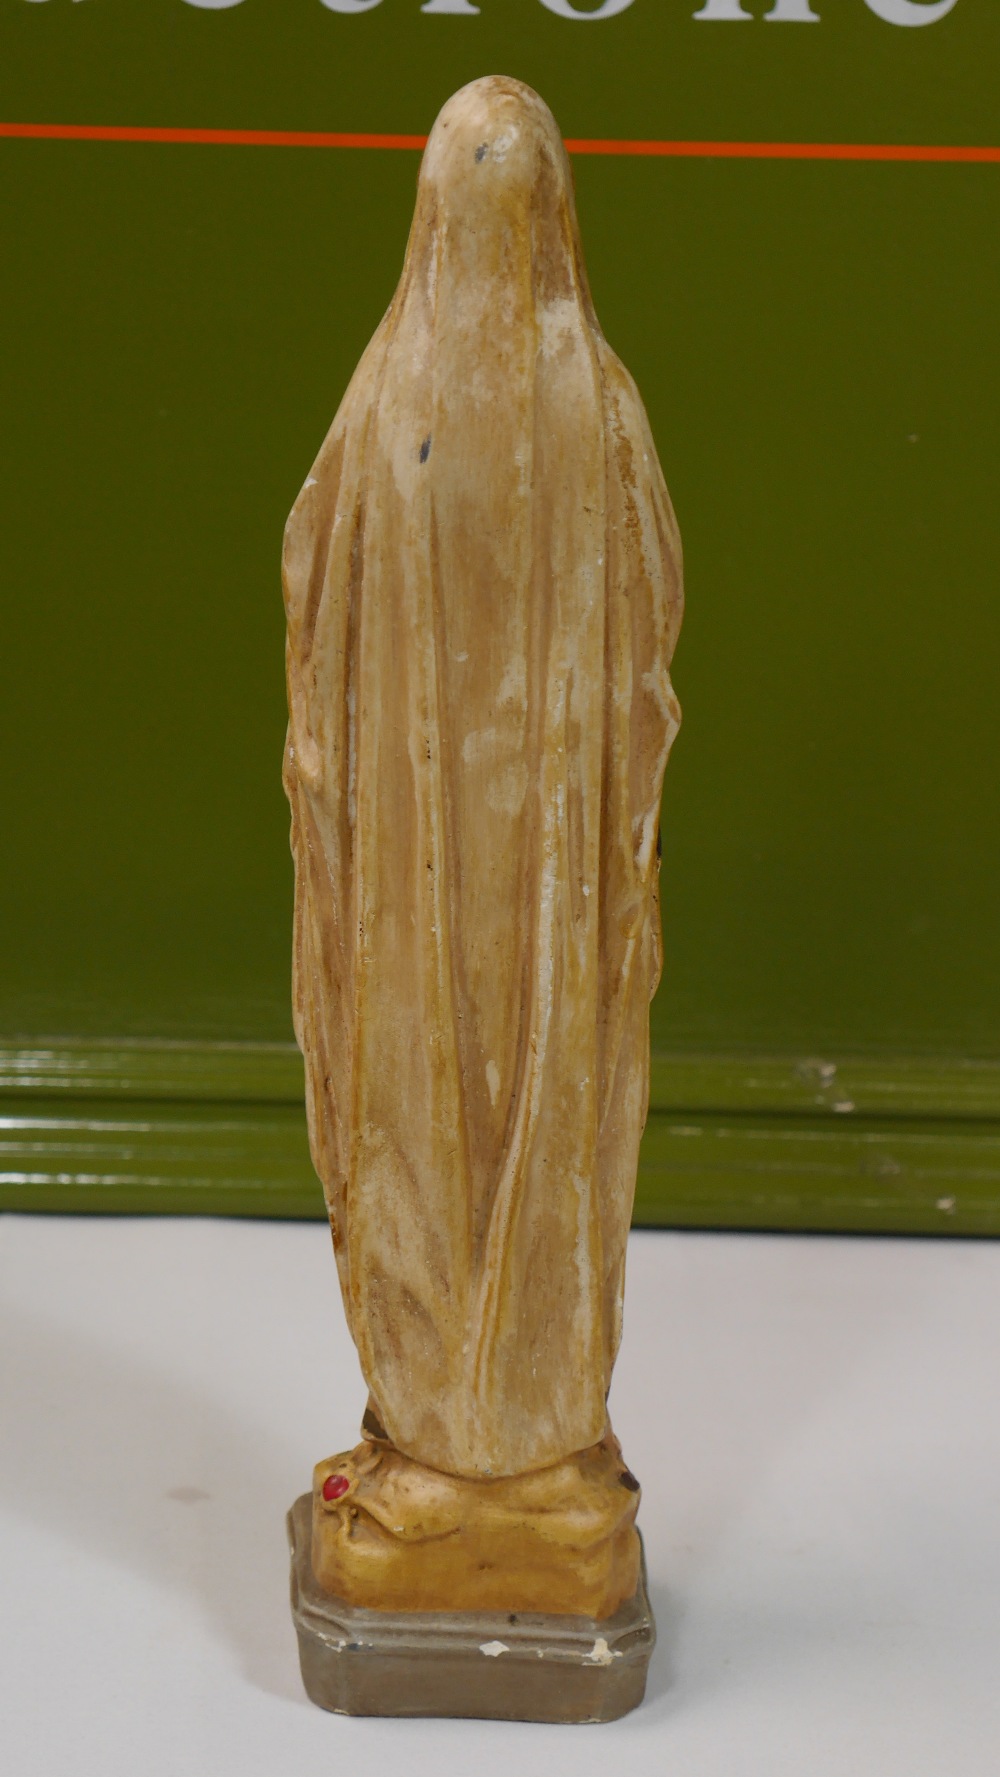 Virgin Mary Our Lady of Lourdes Oostakker Bisque Porcelain Religious Statue - Image 4 of 7